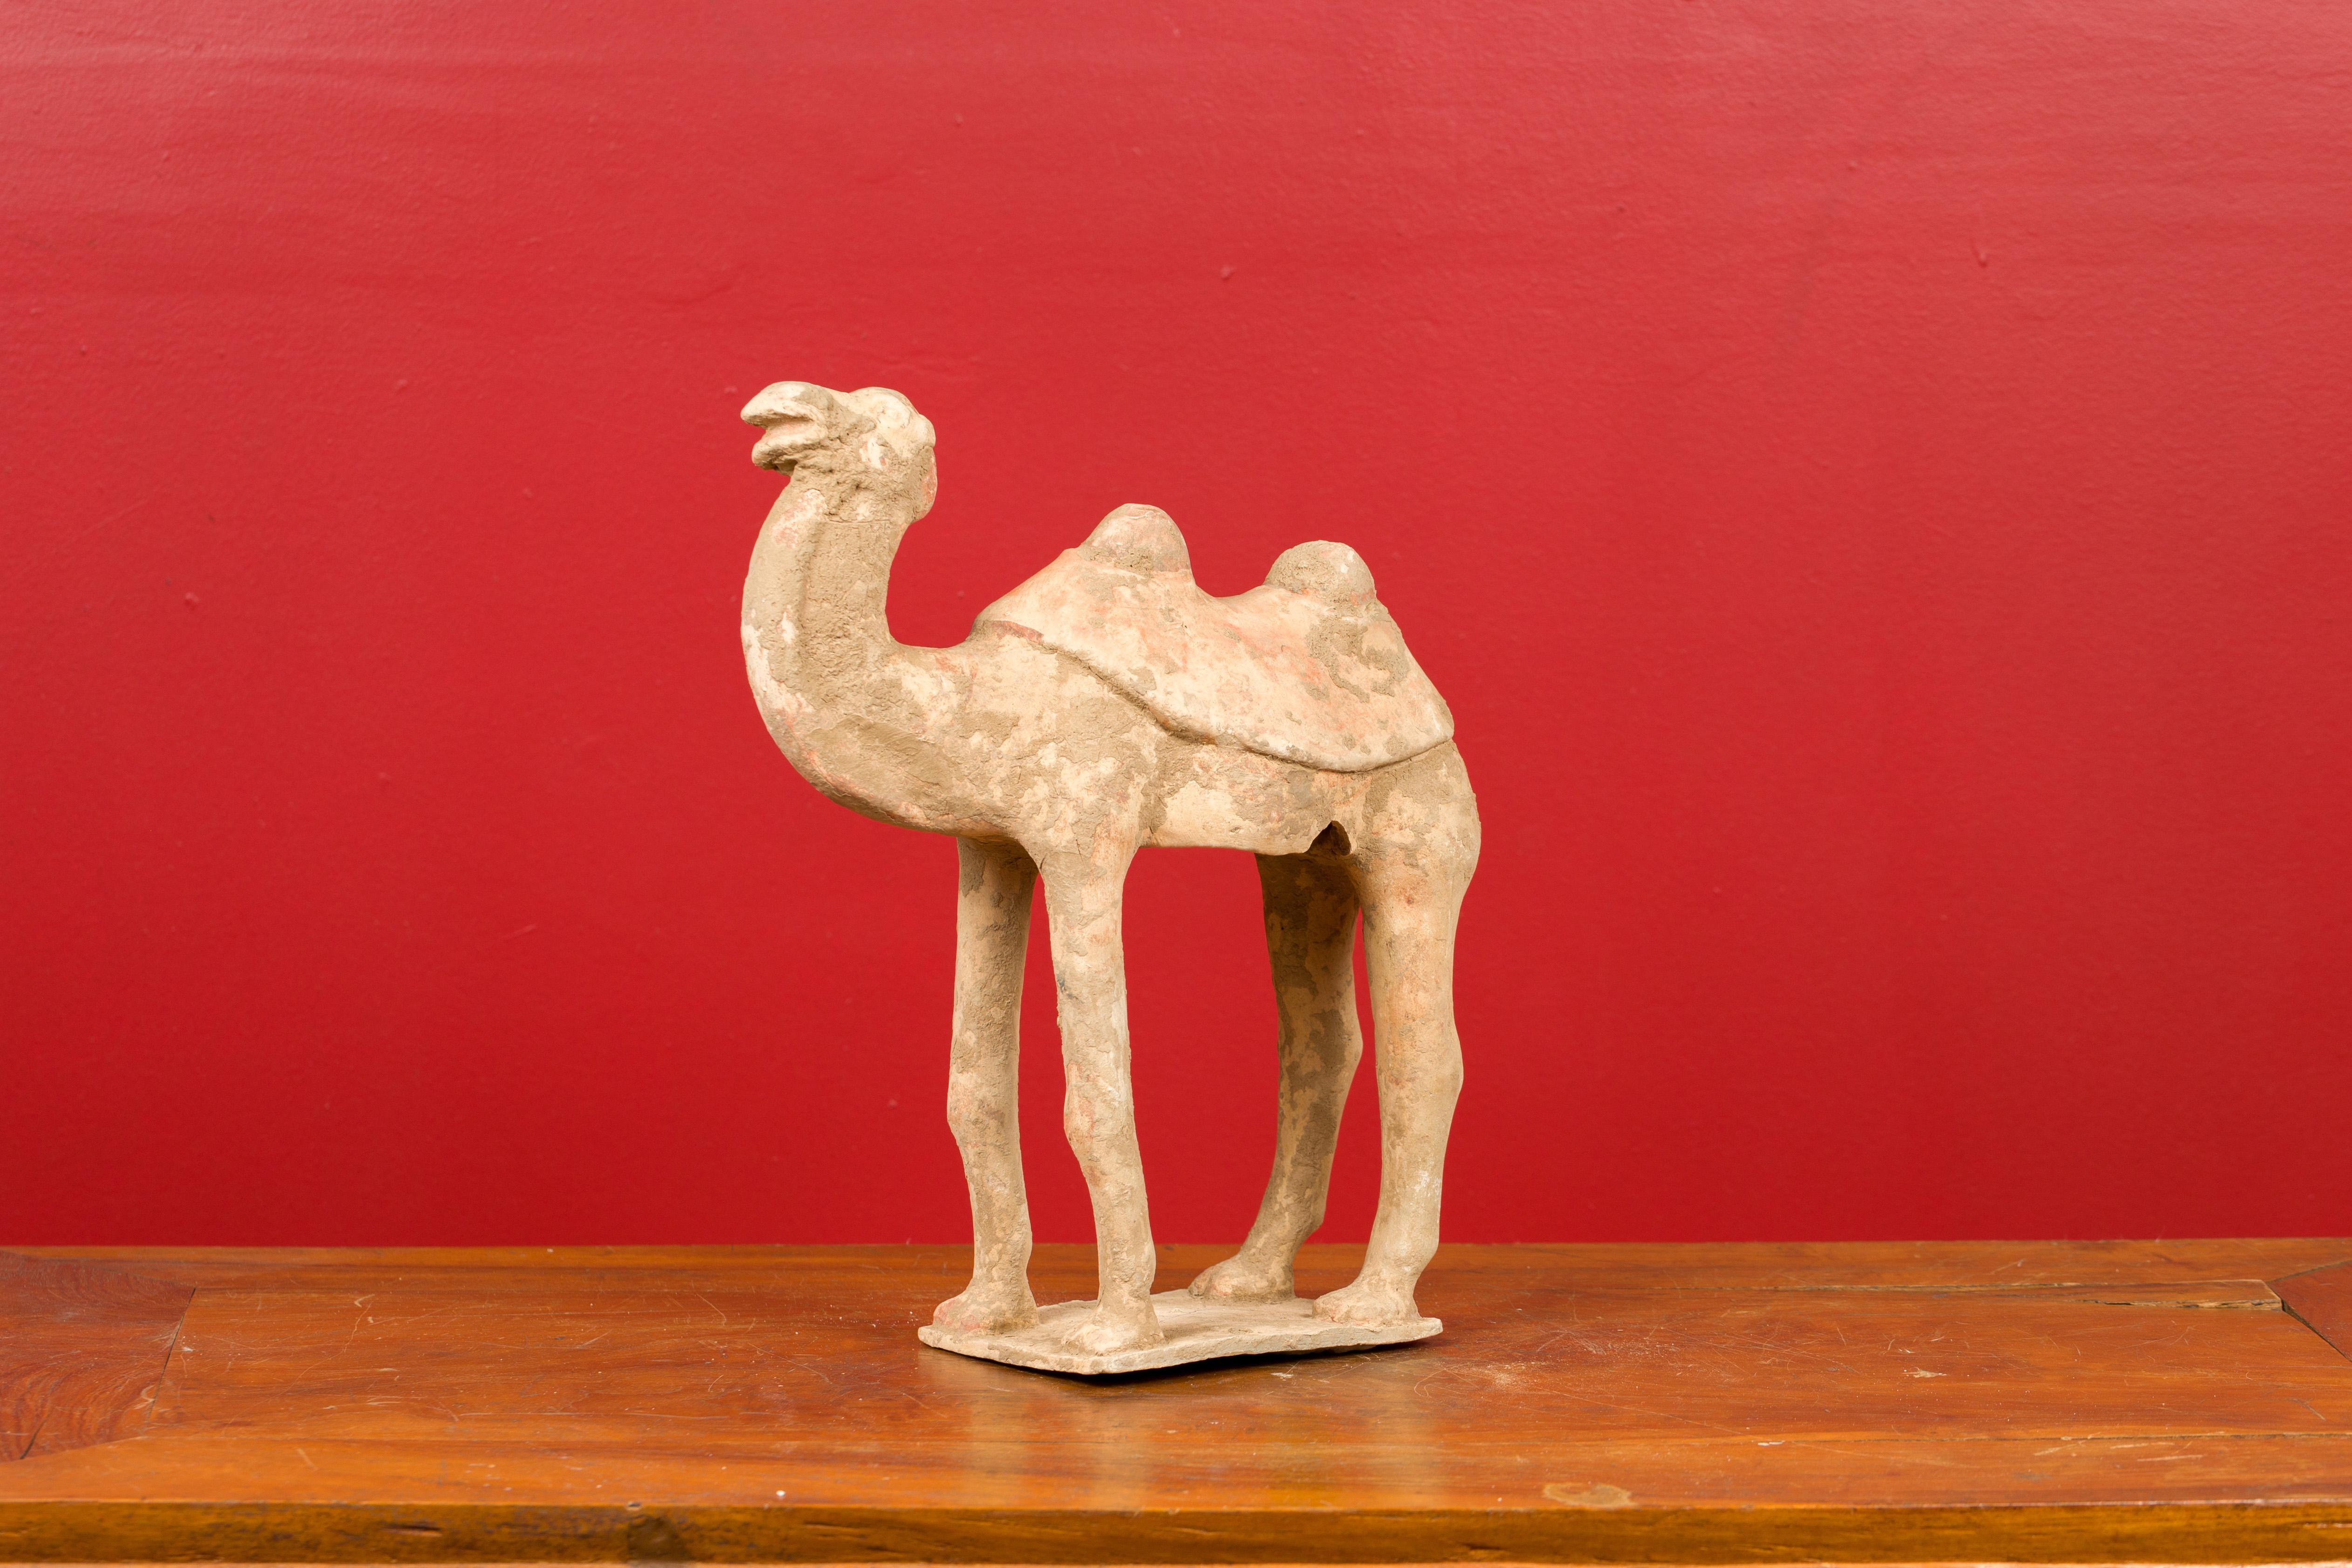 Hand-Painted Chinese Han Dynasty 202 BC-200 AD Mingqi Camel with Original Orange Paint